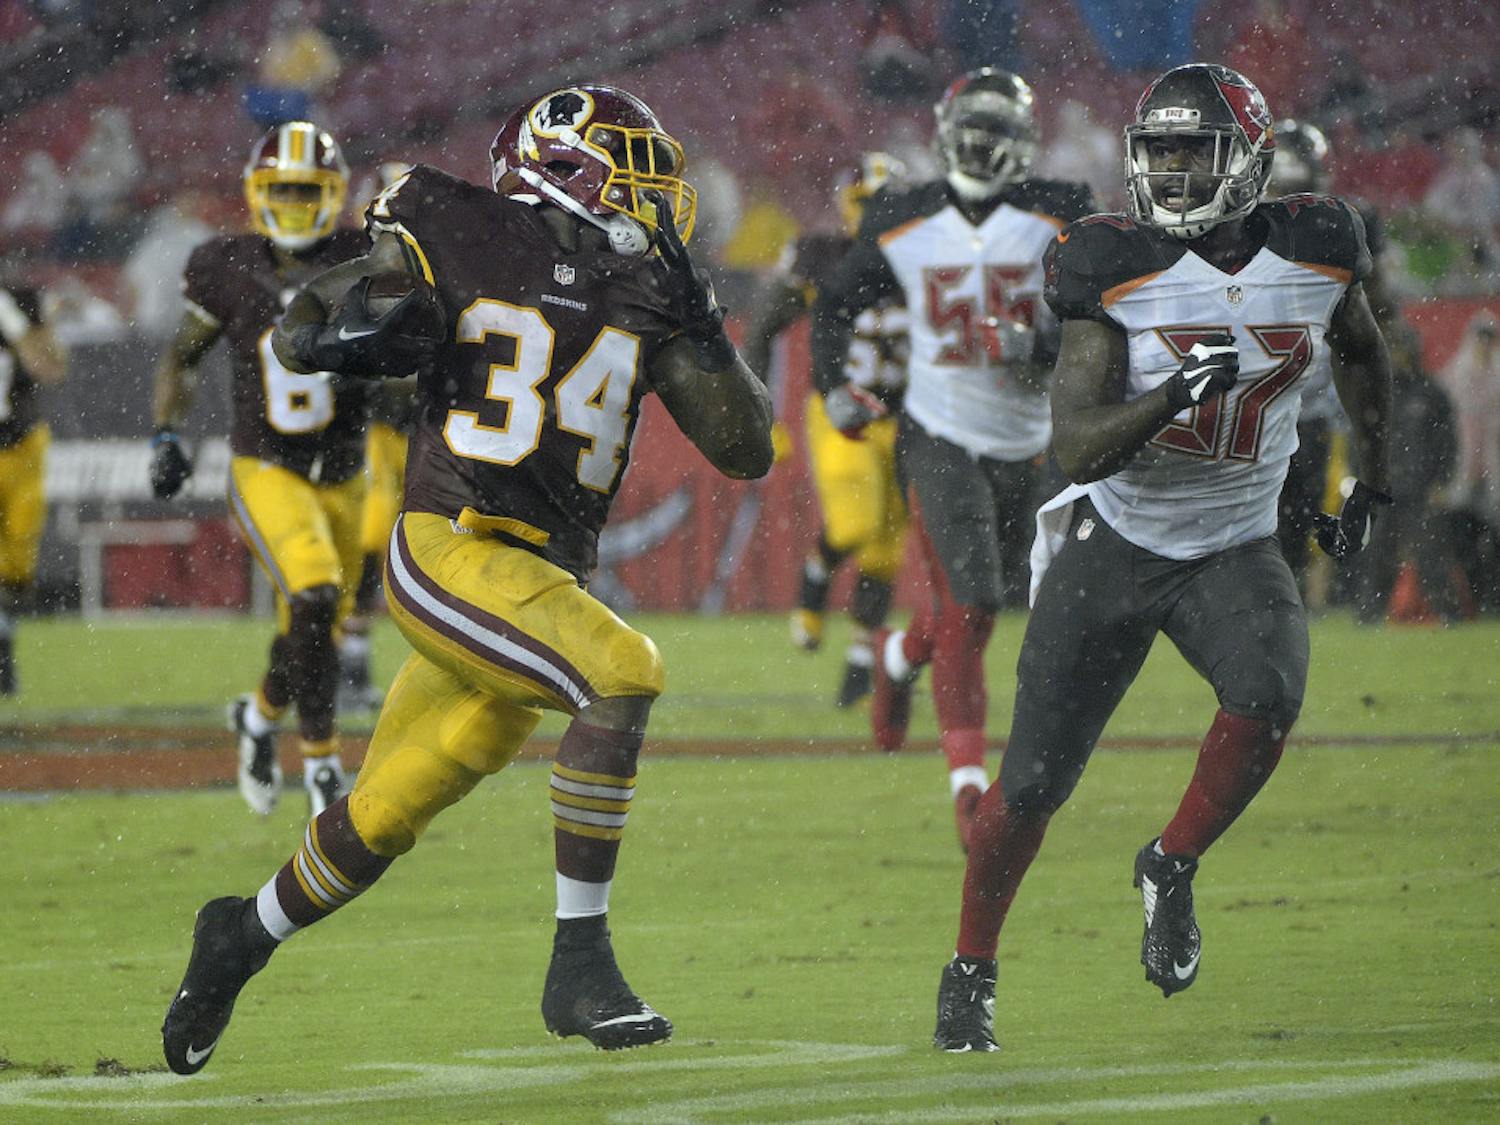 Washington Redskins running back Mack Brown (34) runs away from Tampa Bay Buccaneers strong safety Keith Tandy (37) on a 60-yard touchdown run during the second quarter of an NFL preseason football game Wednesday, Aug. 31, 2016, in Tampa, Fla. (AP Photo/Phelan M. Ebenhack)